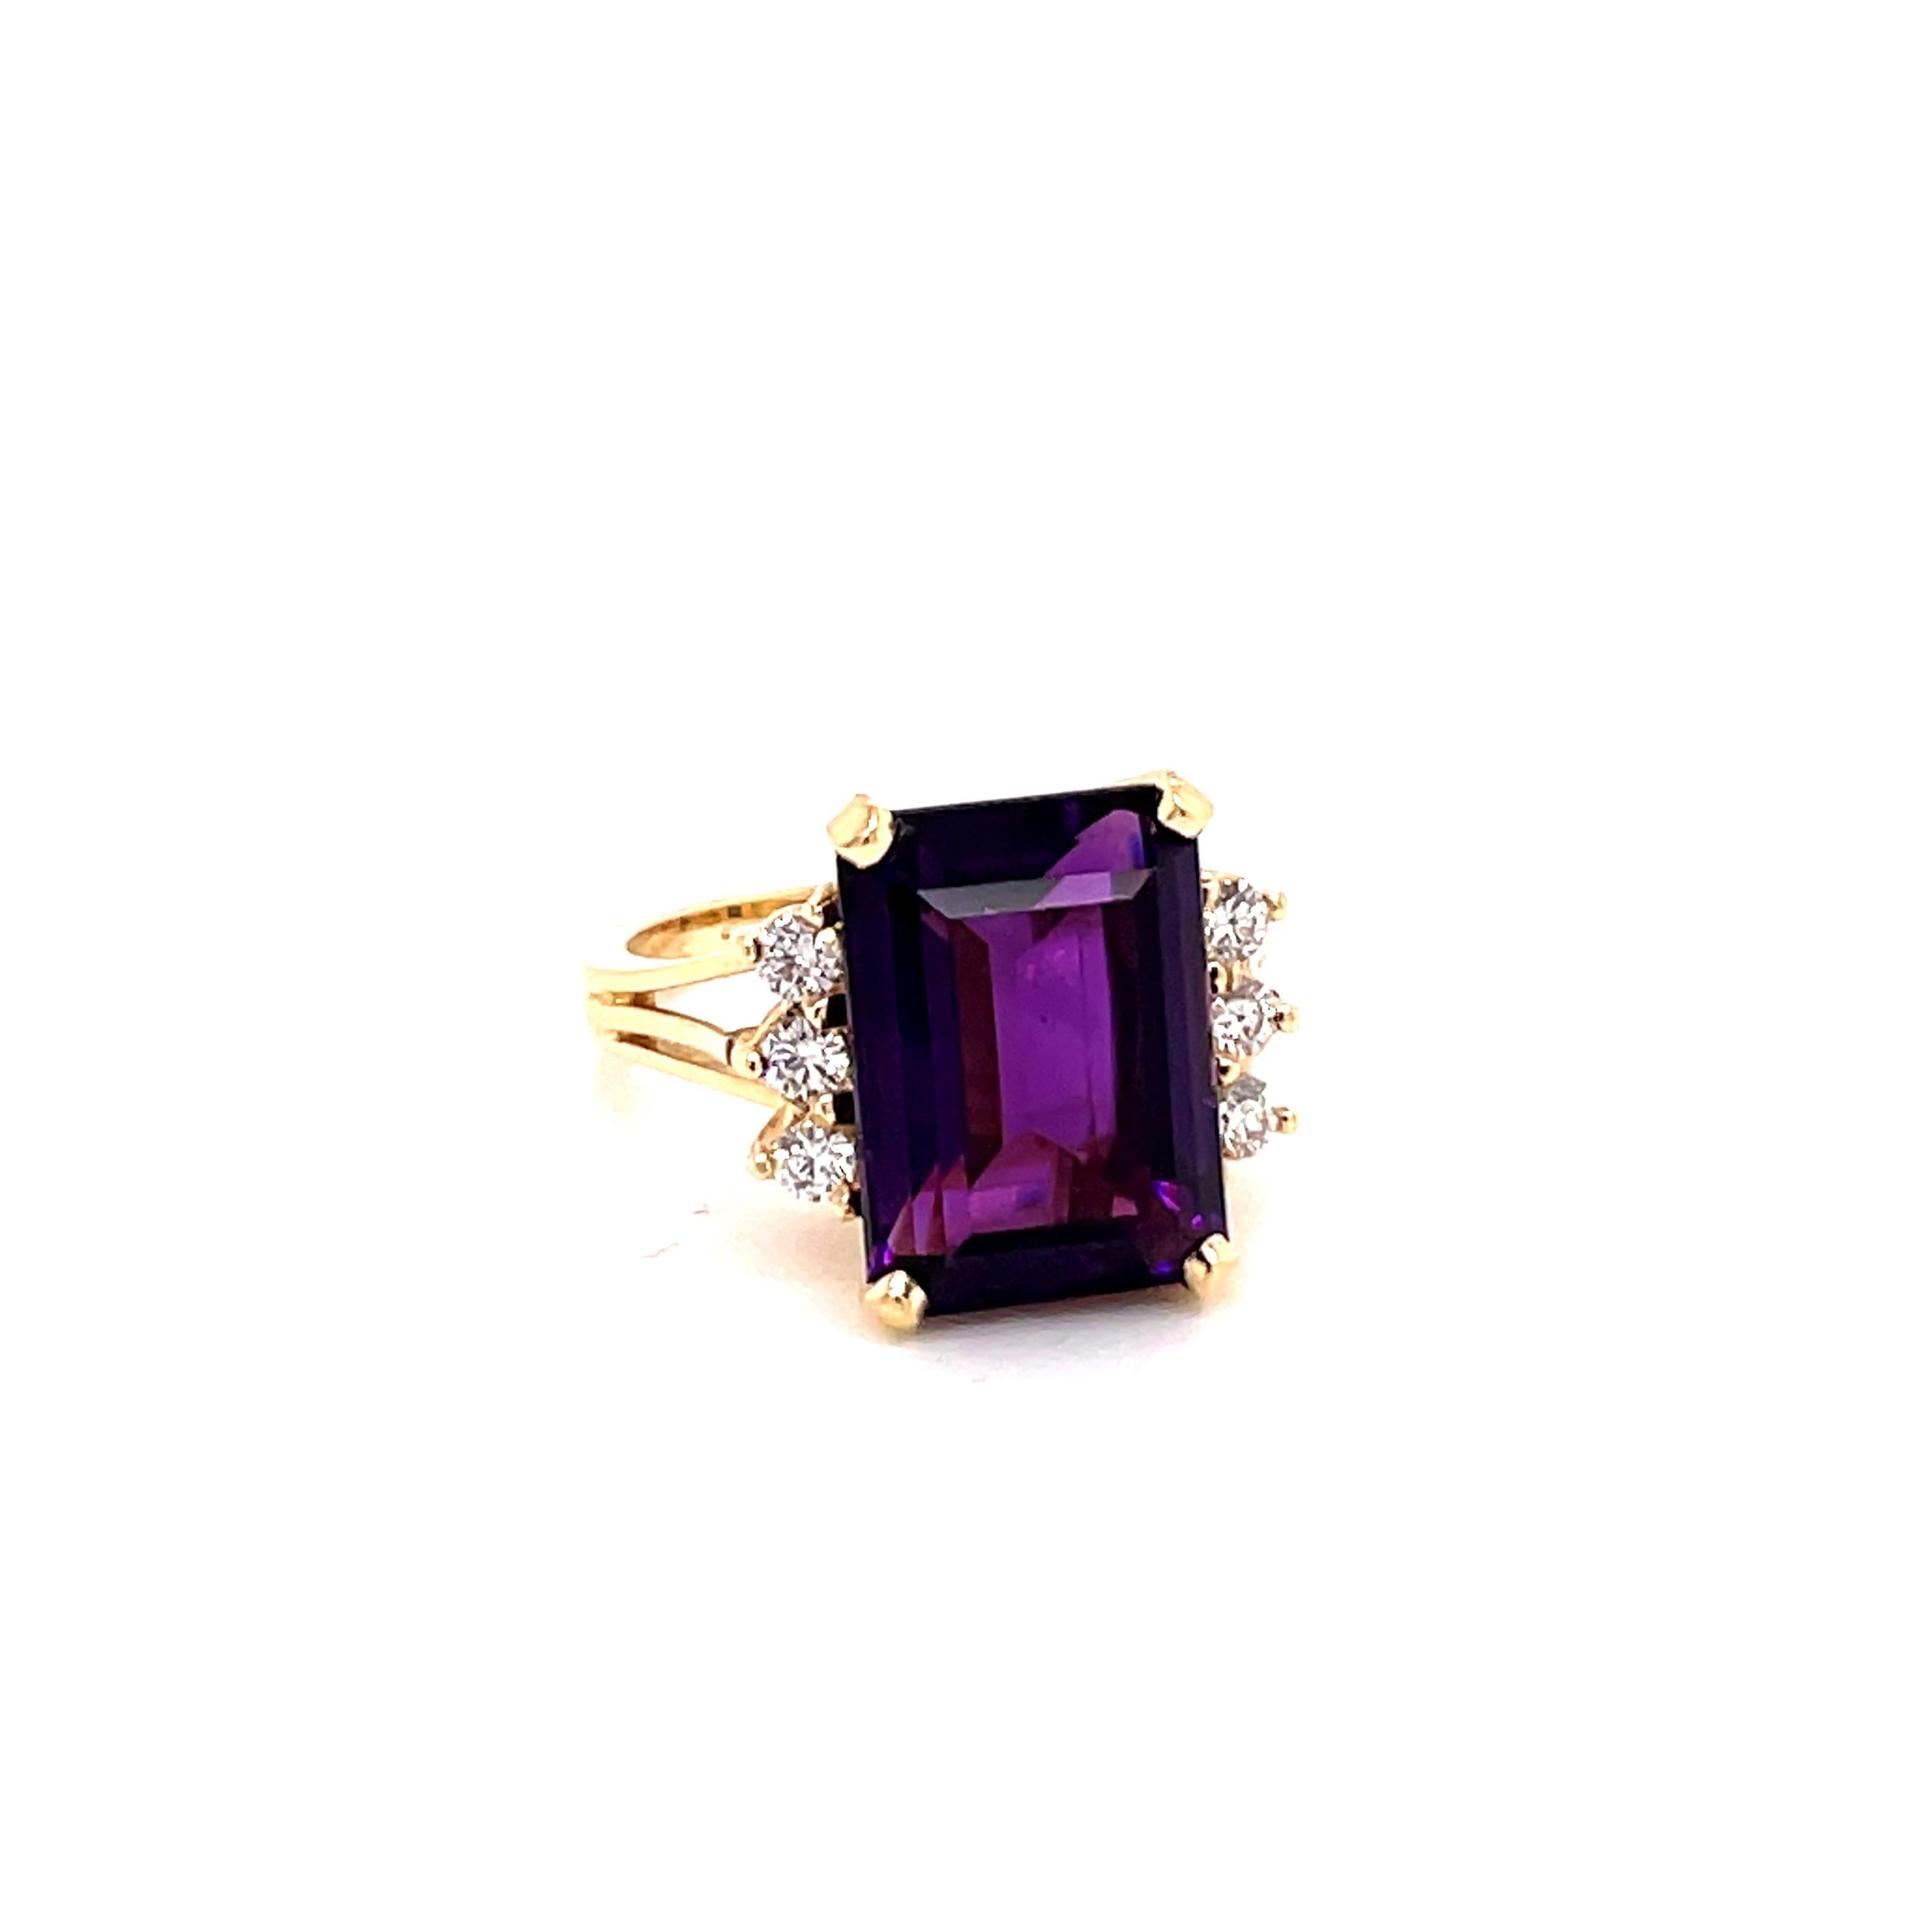 Vintage 1980's 7.35ct Emerald cut Amethyst Ring with Diamonds - the amethyst weighs approximately 7.35ct and measures 14 x 10mm.  It is accented with 6 round brilliant diamonds weighing approximately .30ct G - H color and SI clarity.  The setting is